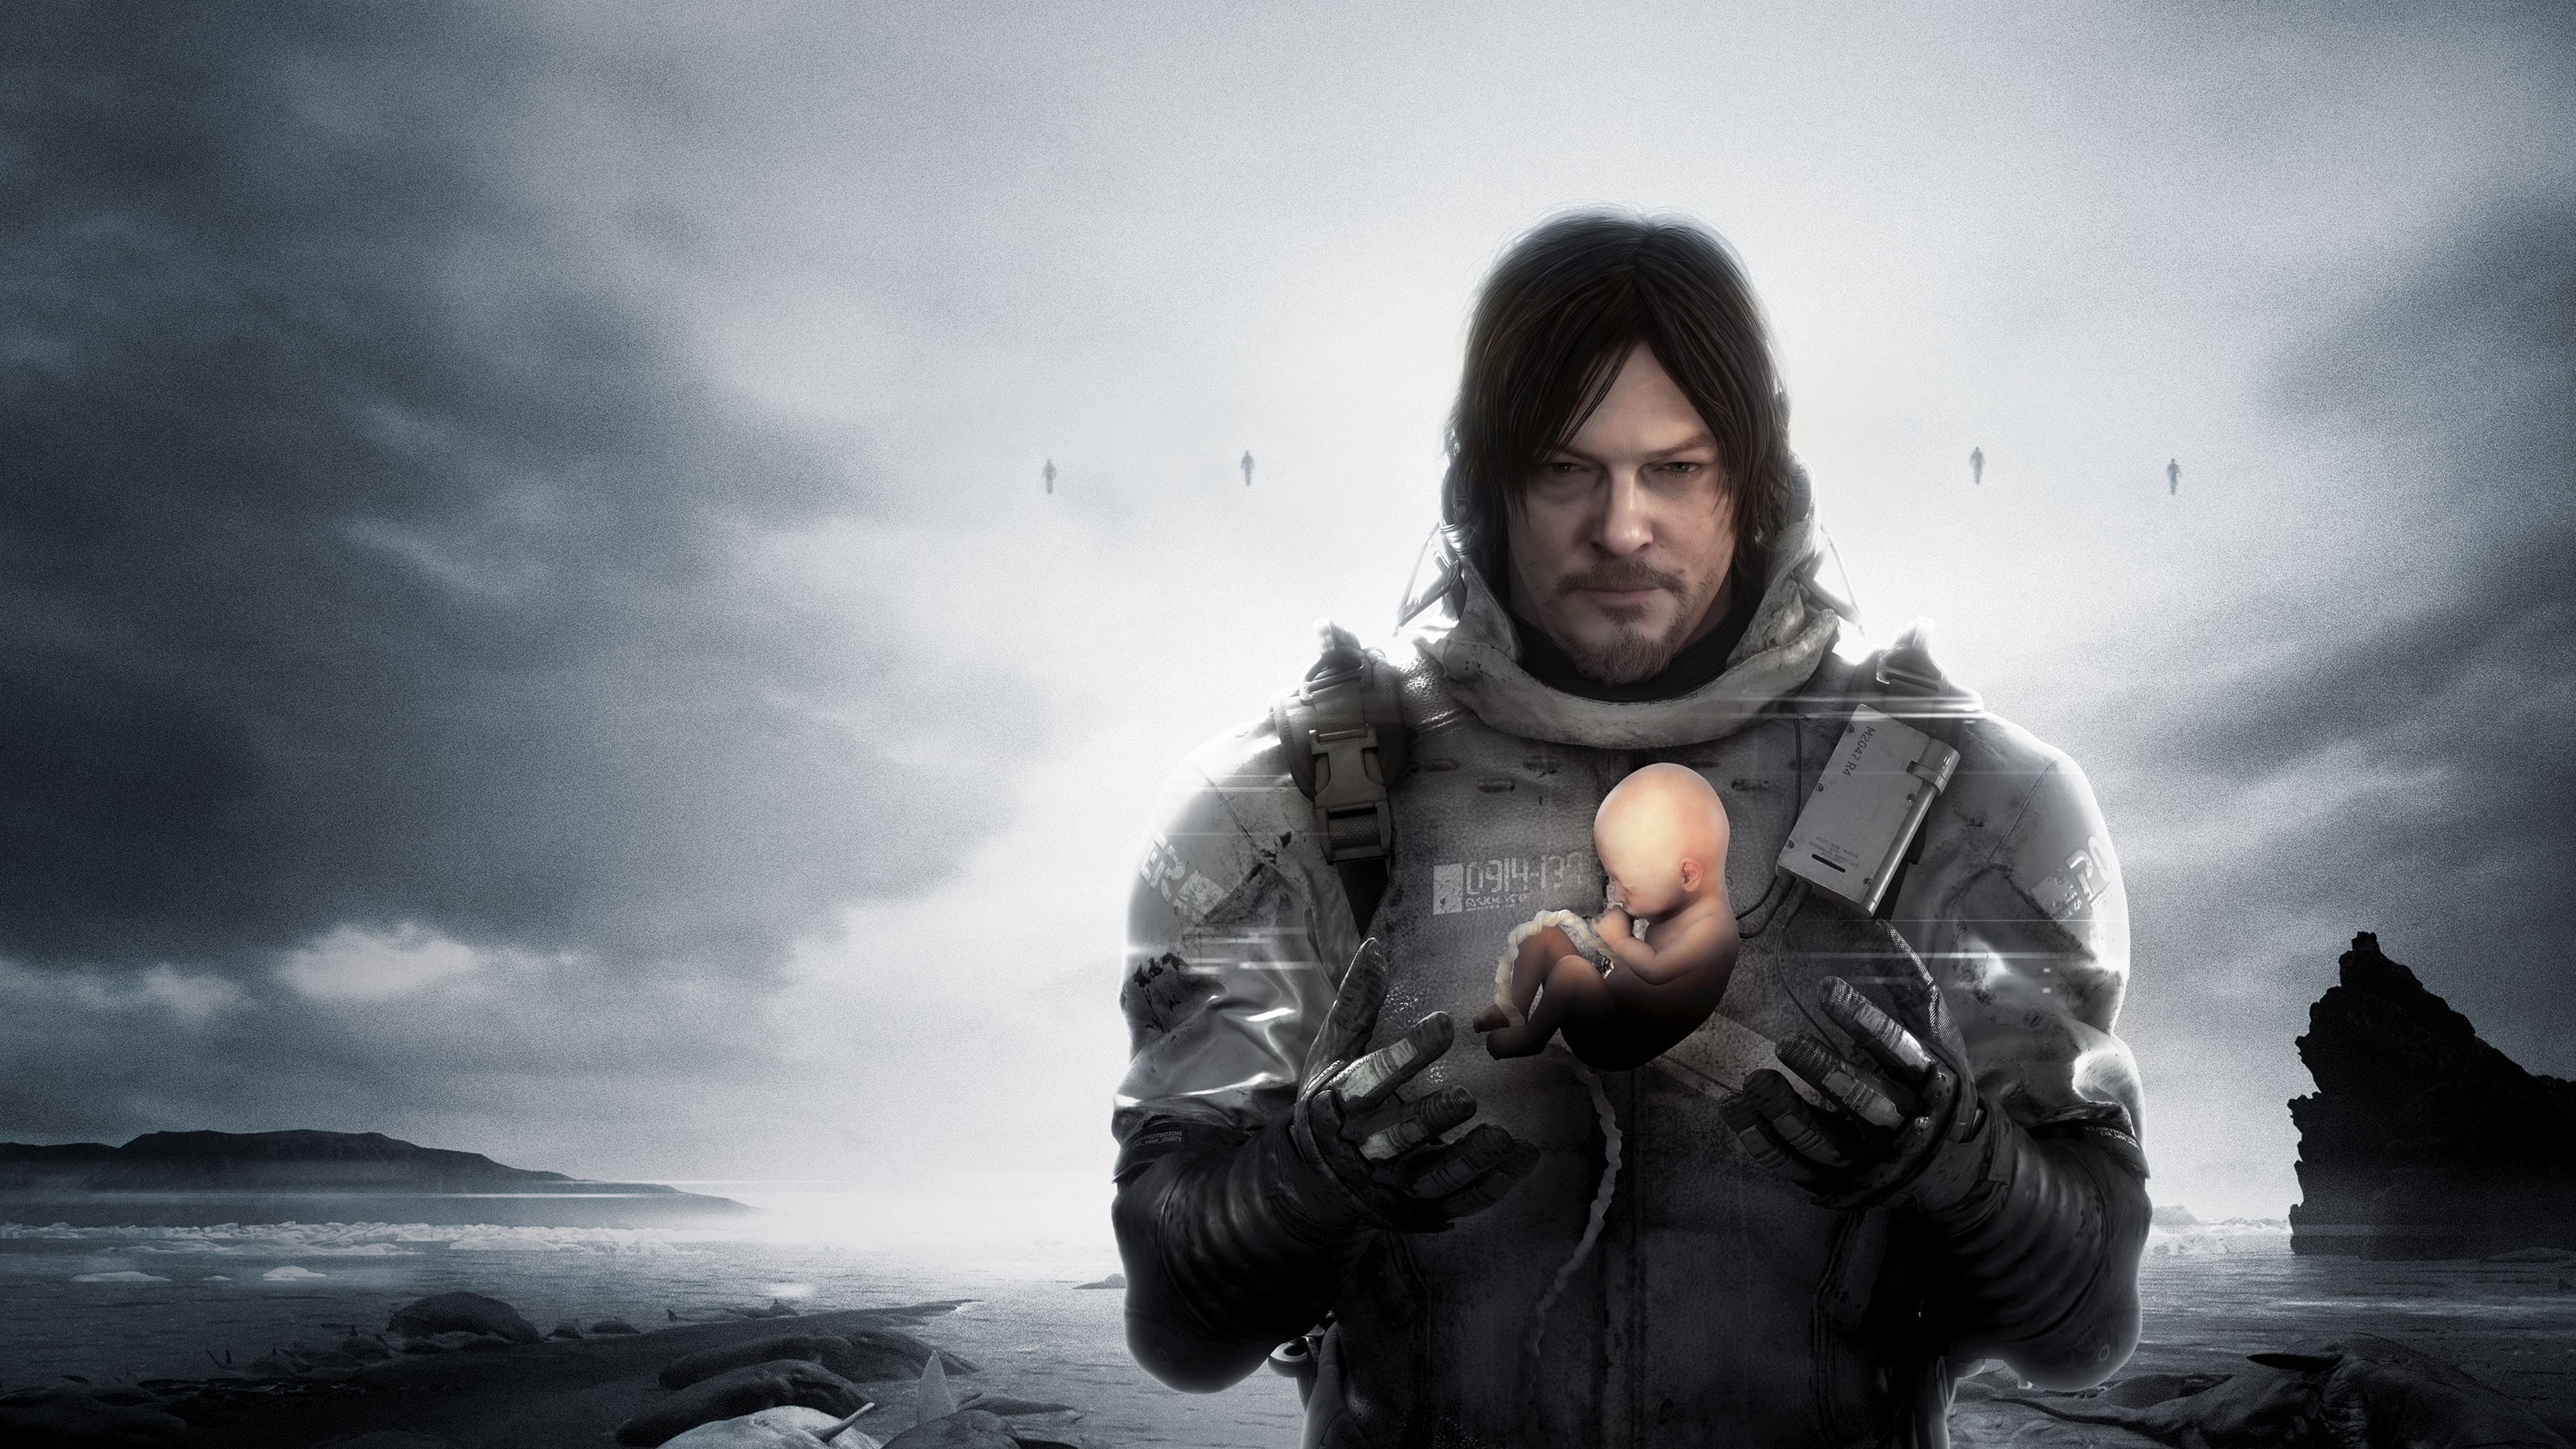 DEATH STRANDING DIRECTOR’S CUT Digital Deluxe Edition (Game)